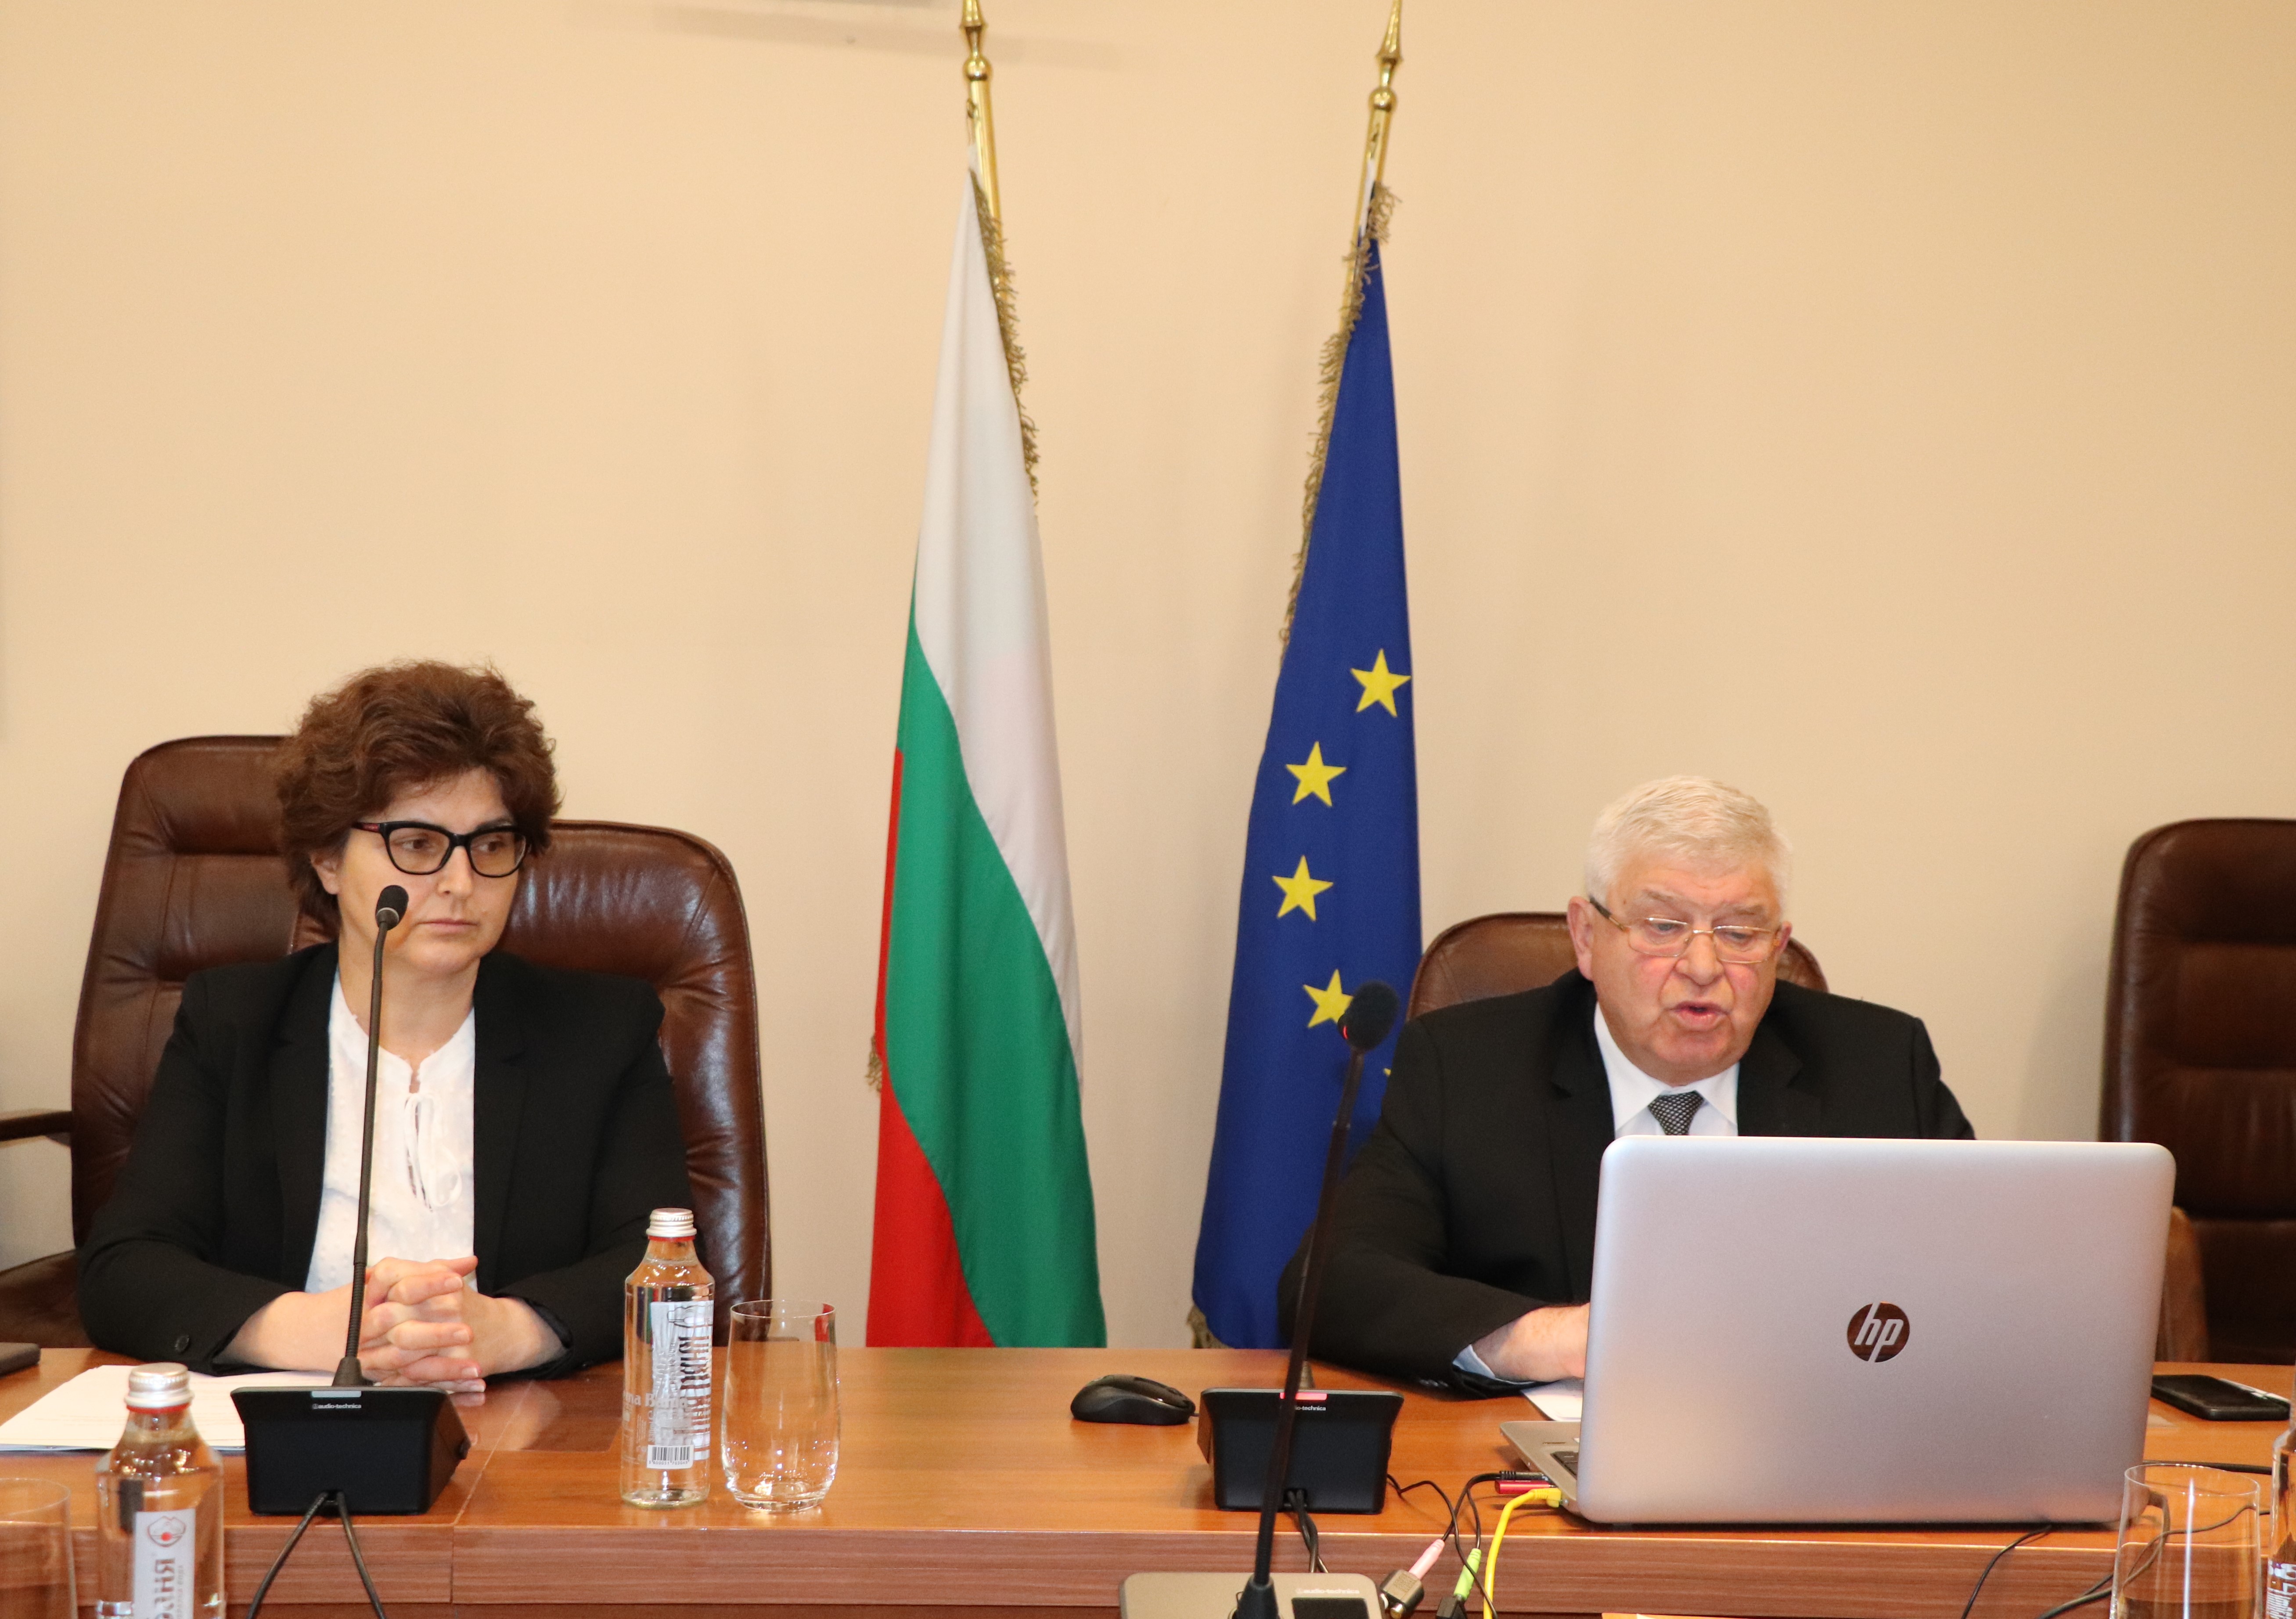 Minister Kiril Ananiev: Our accession to the Banking Union and the Exchange Rate Mechanism 2 has further increased investors’ confidence in Bulgaria